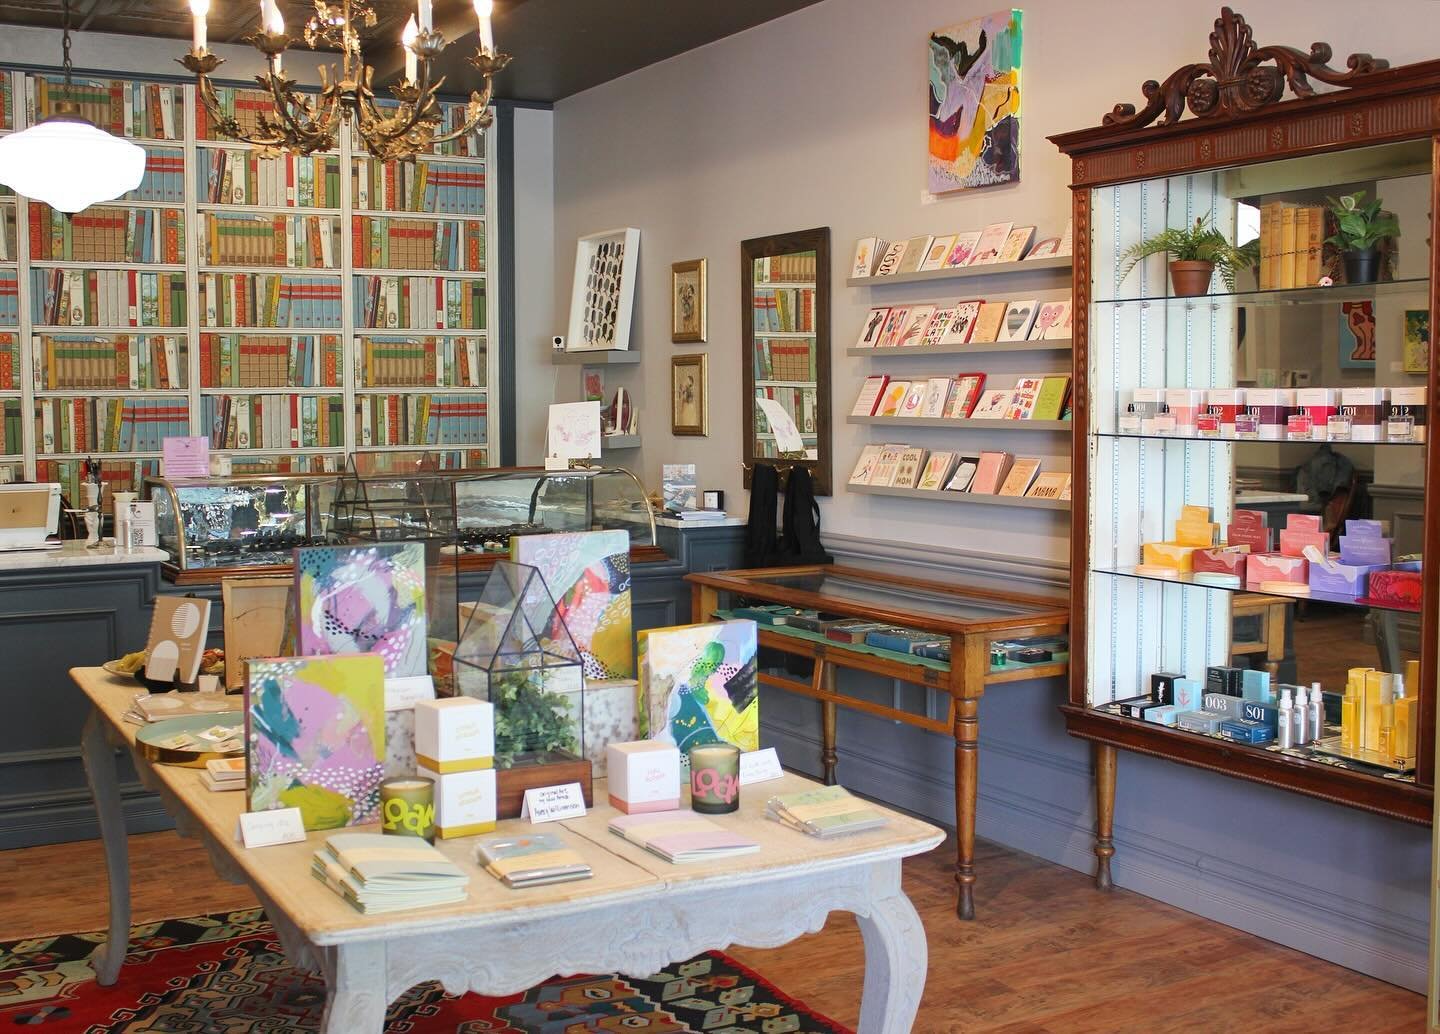 Happy Graduation weekend! We have refreshed the shop for the spring season and it is looking so fab. Stop in and say hello. Congrats to the class of 2024. We hope you have the best weekend celebrating. #annarbor #shopsmall #shoplocal #universityofmic